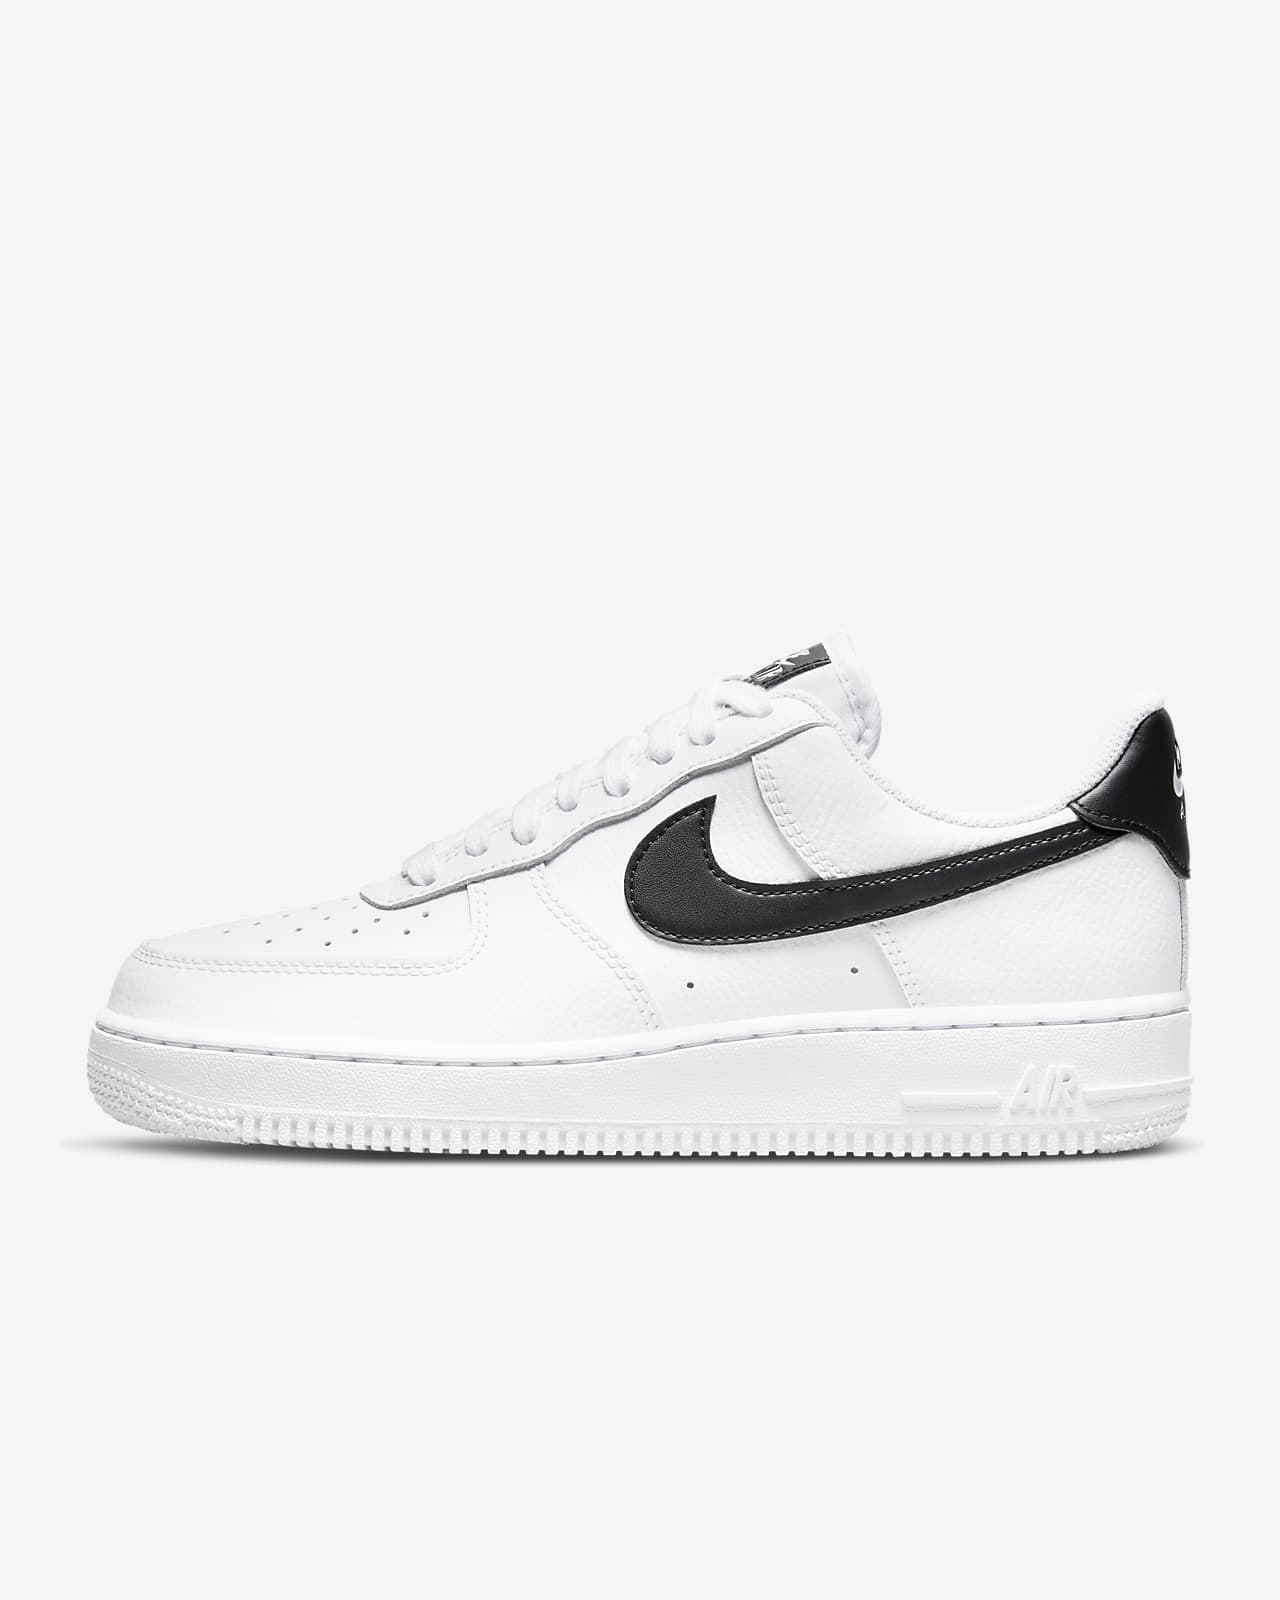 Chaussure Nike Air Force 1 '07 pour Femme